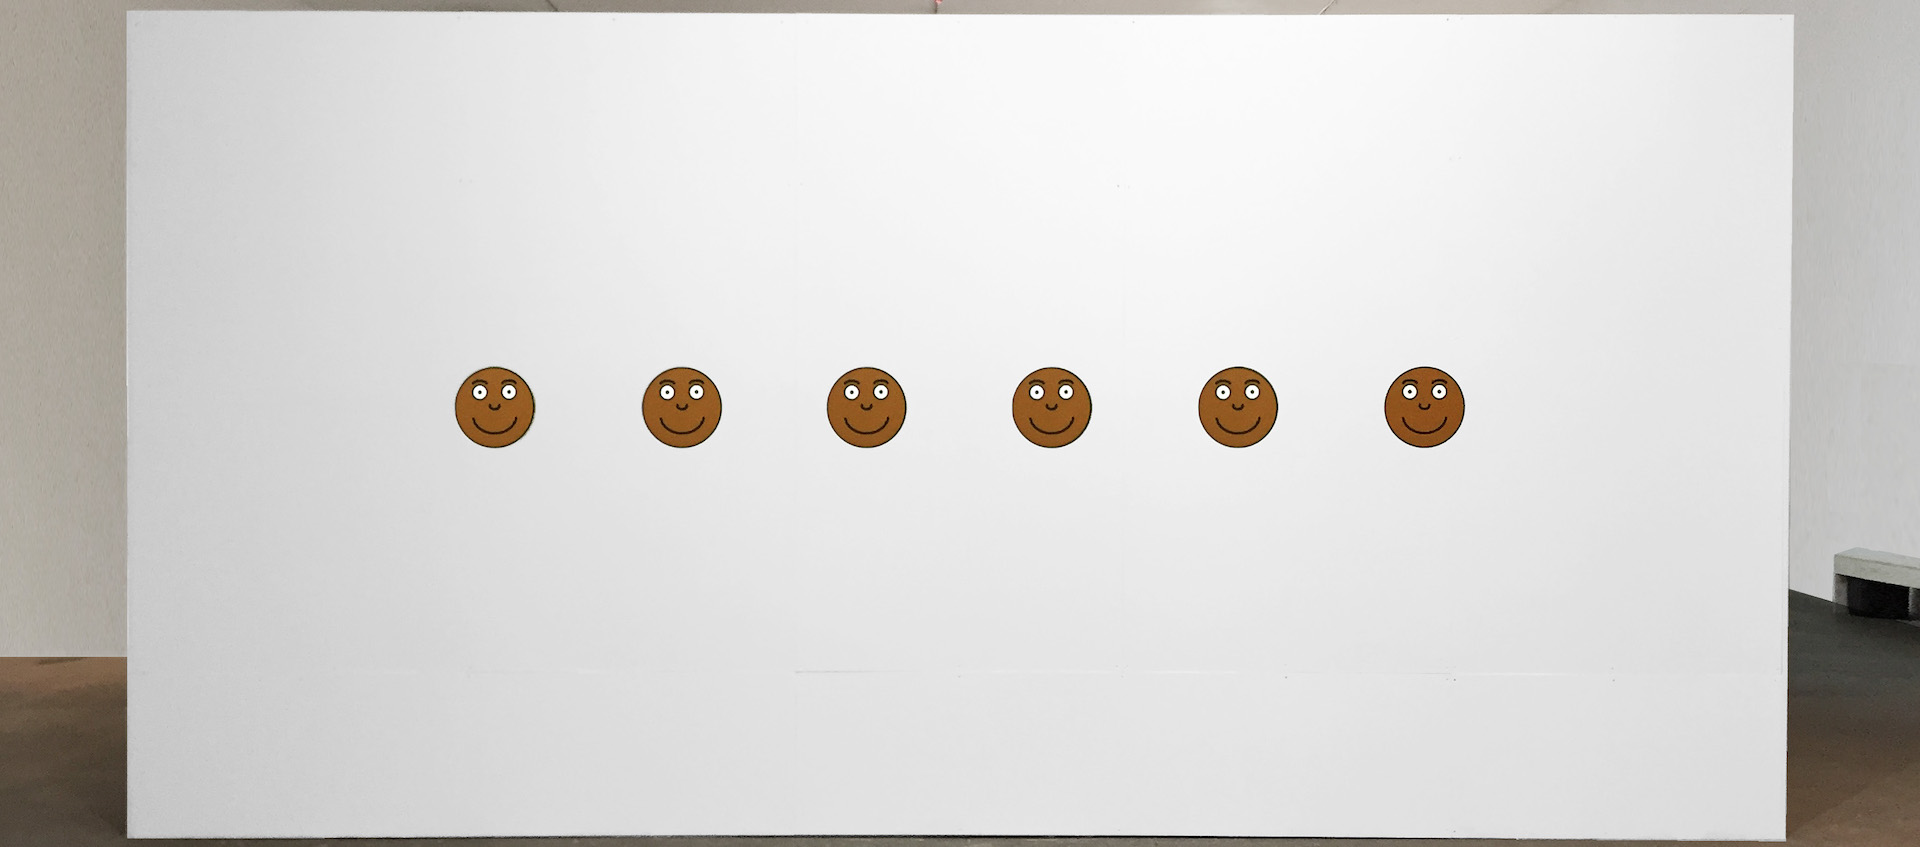 Artist Carolyn Lazard's Pain Scale, a series of round simple drawings mimicking the pain scale graphics used in hospitals, but in this case all faces have brown skin and all wear the same smile